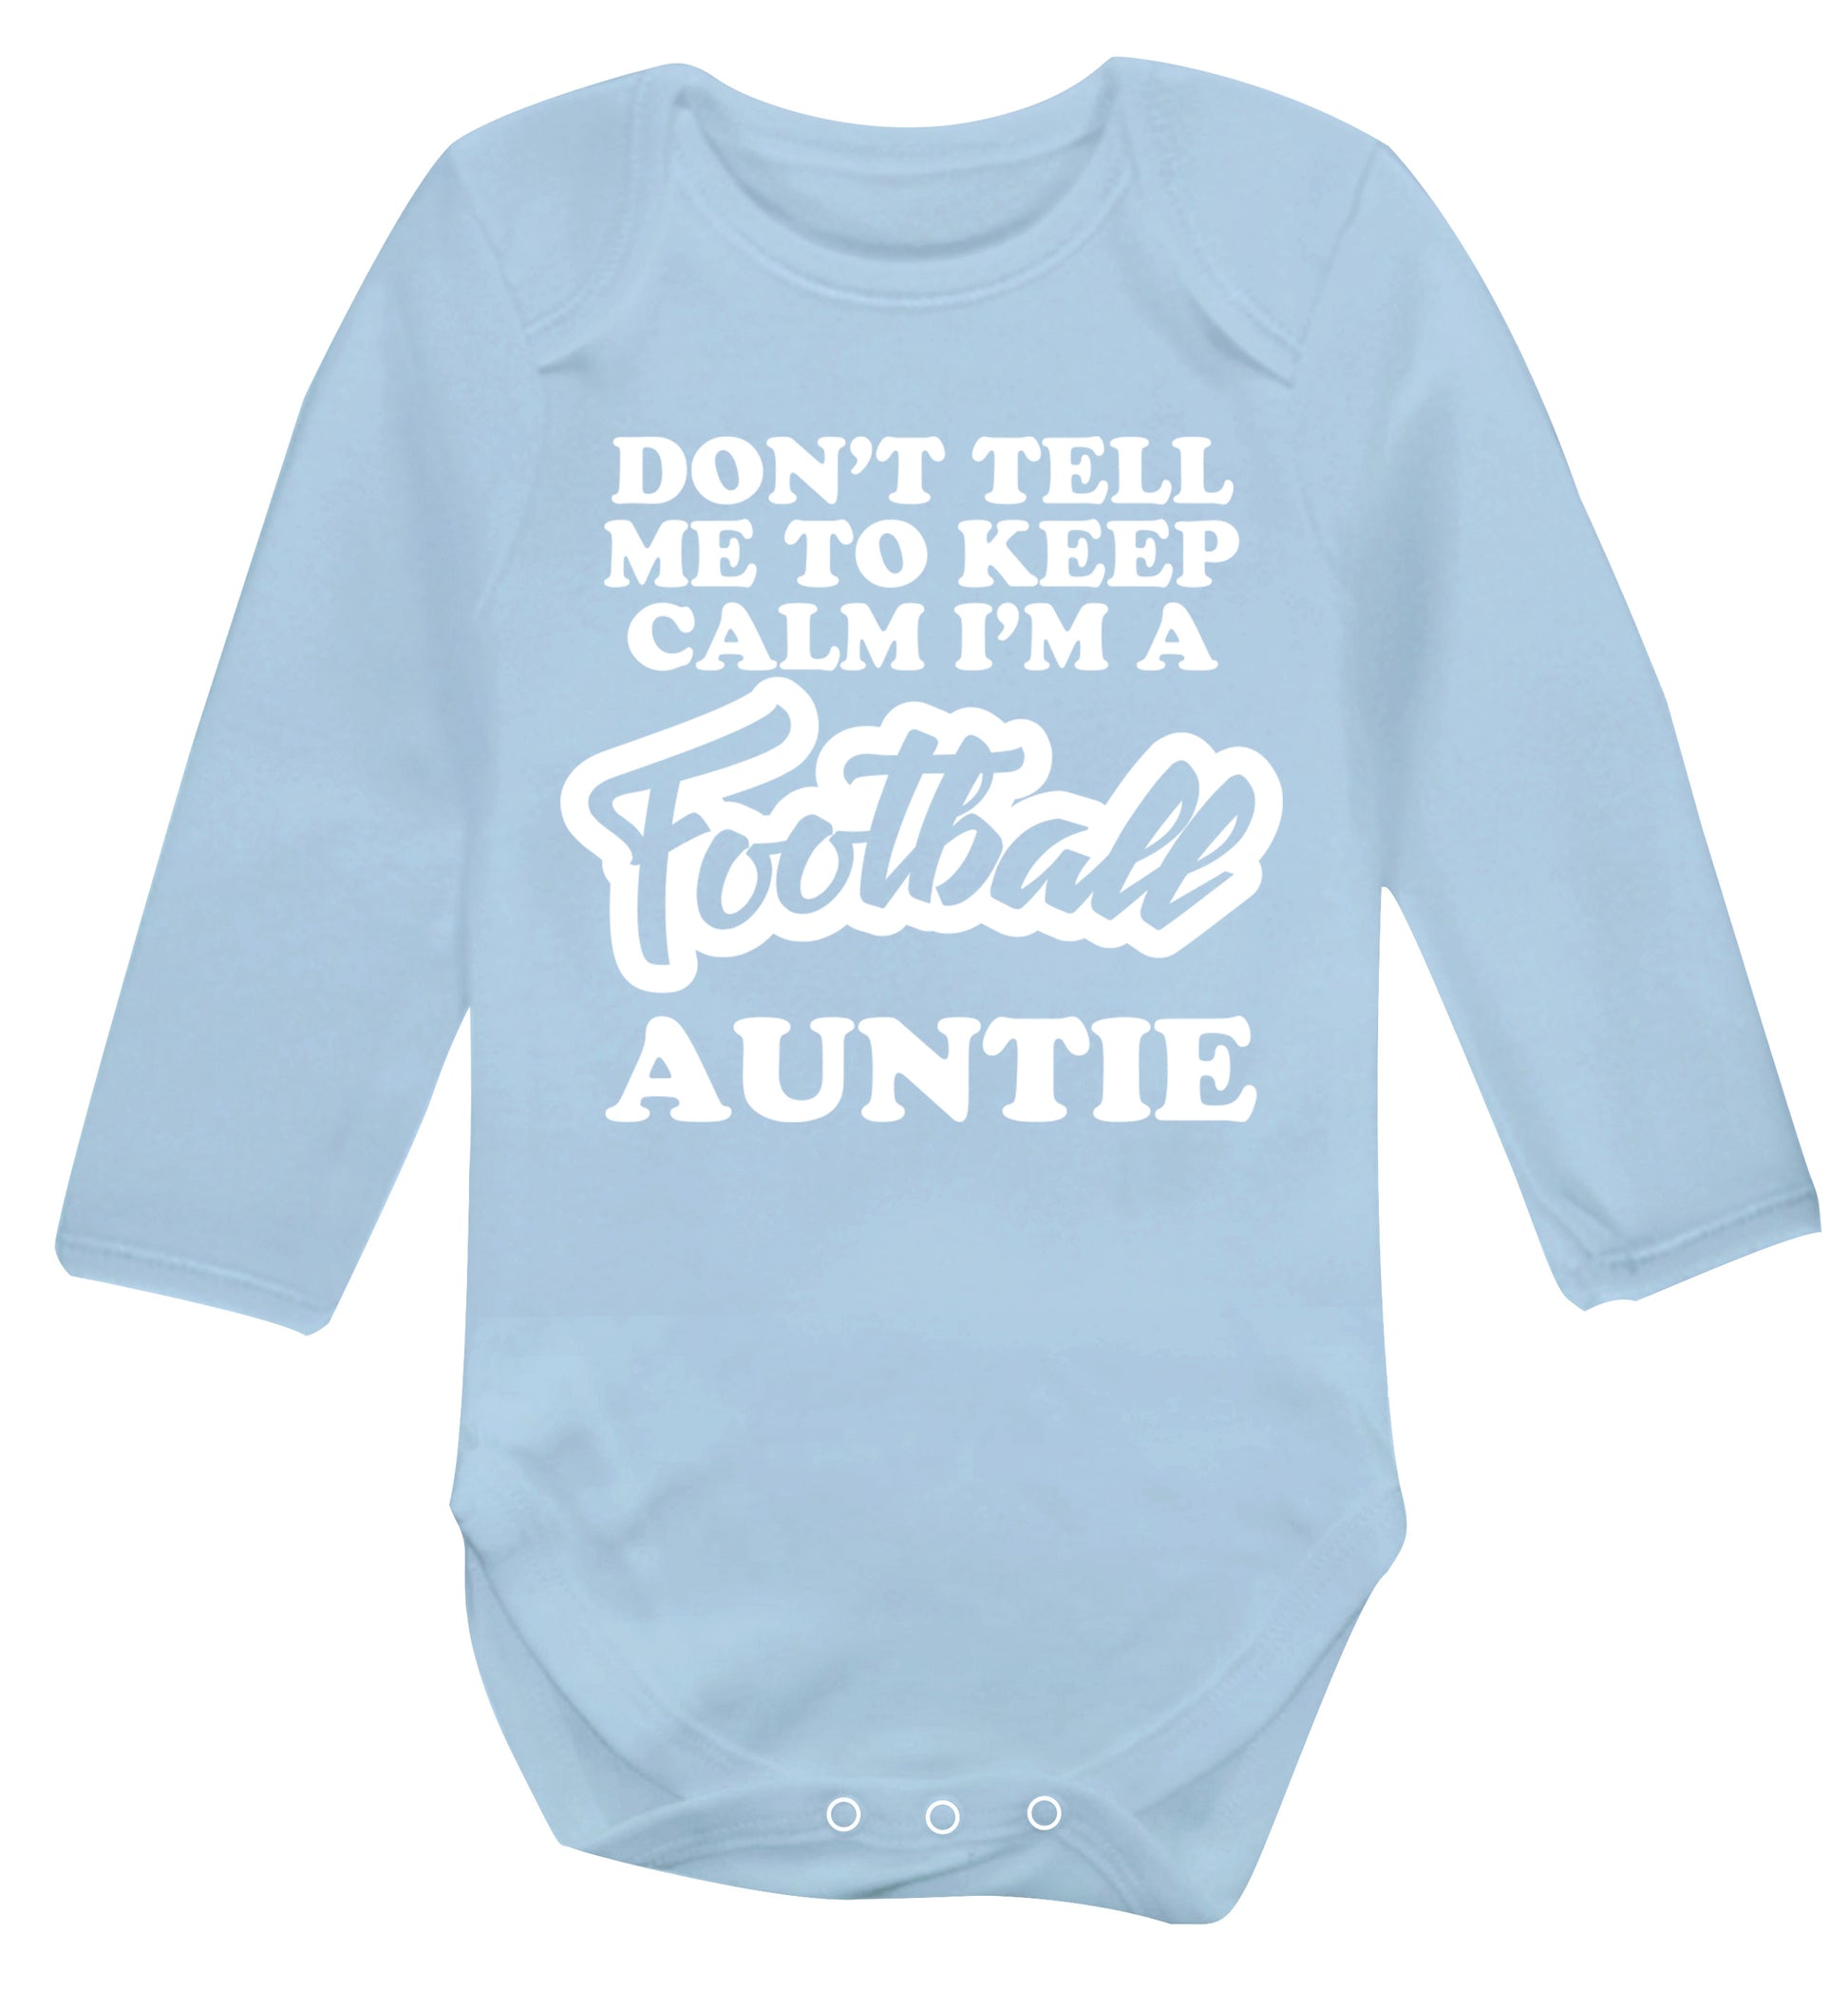 Don't tell me to keep calm I'm a football auntie Baby Vest long sleeved pale blue 6-12 months